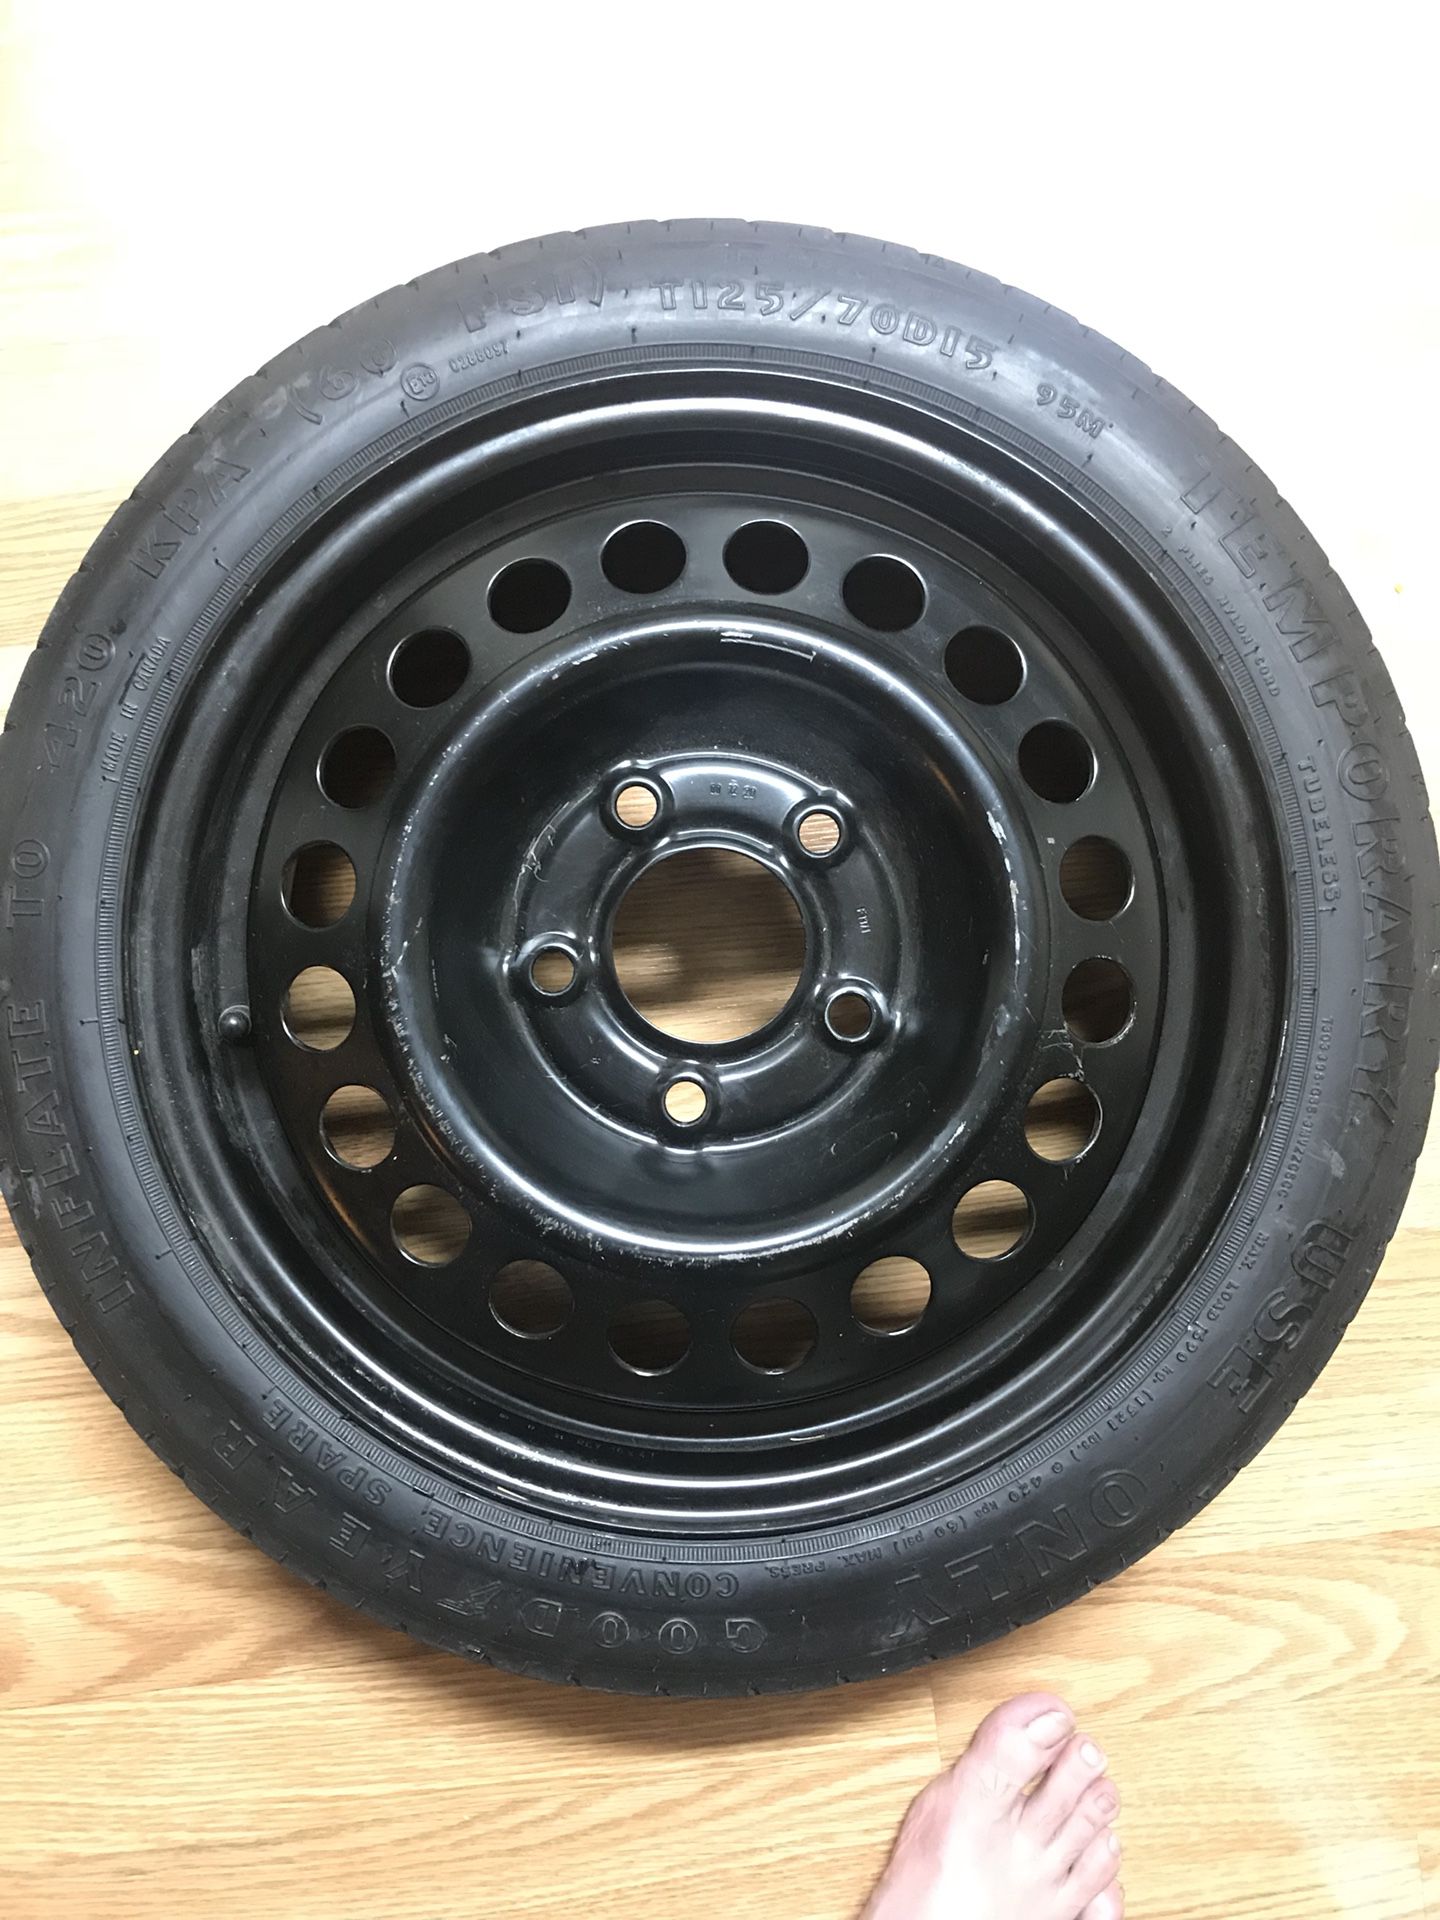 Goodyear Space Saving Connivence Spare. Brand New